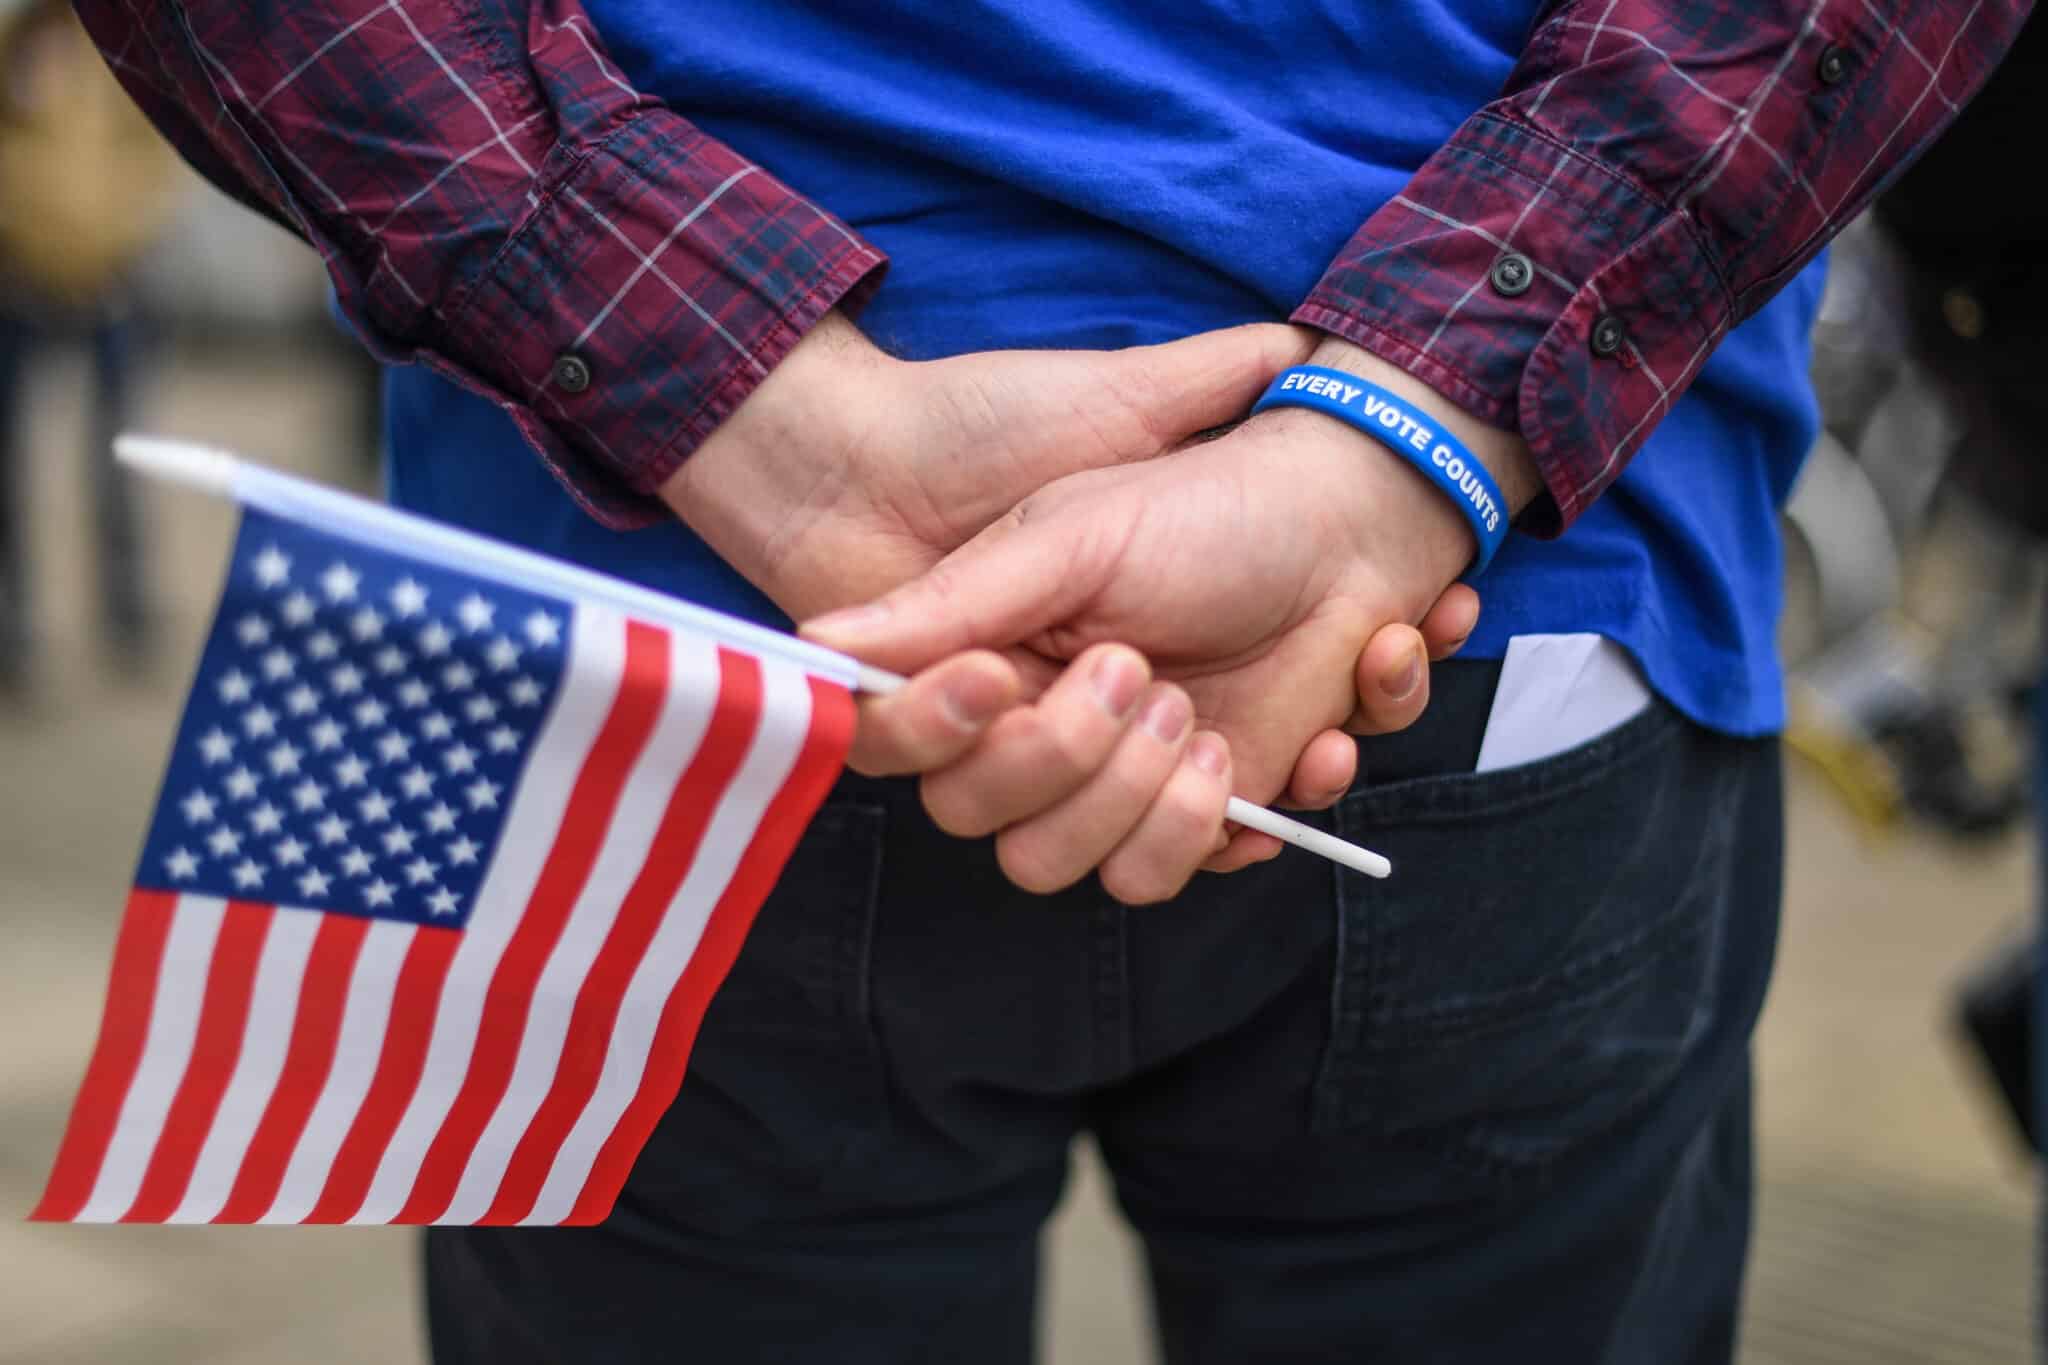 OXFORD, ENGLAND - MARCH 03: A man holds an American flag while wearing a wristband reading 'Every Vote Counts' outside a polling station on 'Super Tuesday' on March 3, 2020 in Oxford, England. 1,357 Democratic delegates are at stake as voters cast their ballots in 14 states and American Samoa on what is known as Super Tuesday. (Photo by Peter Summers/Getty Images)